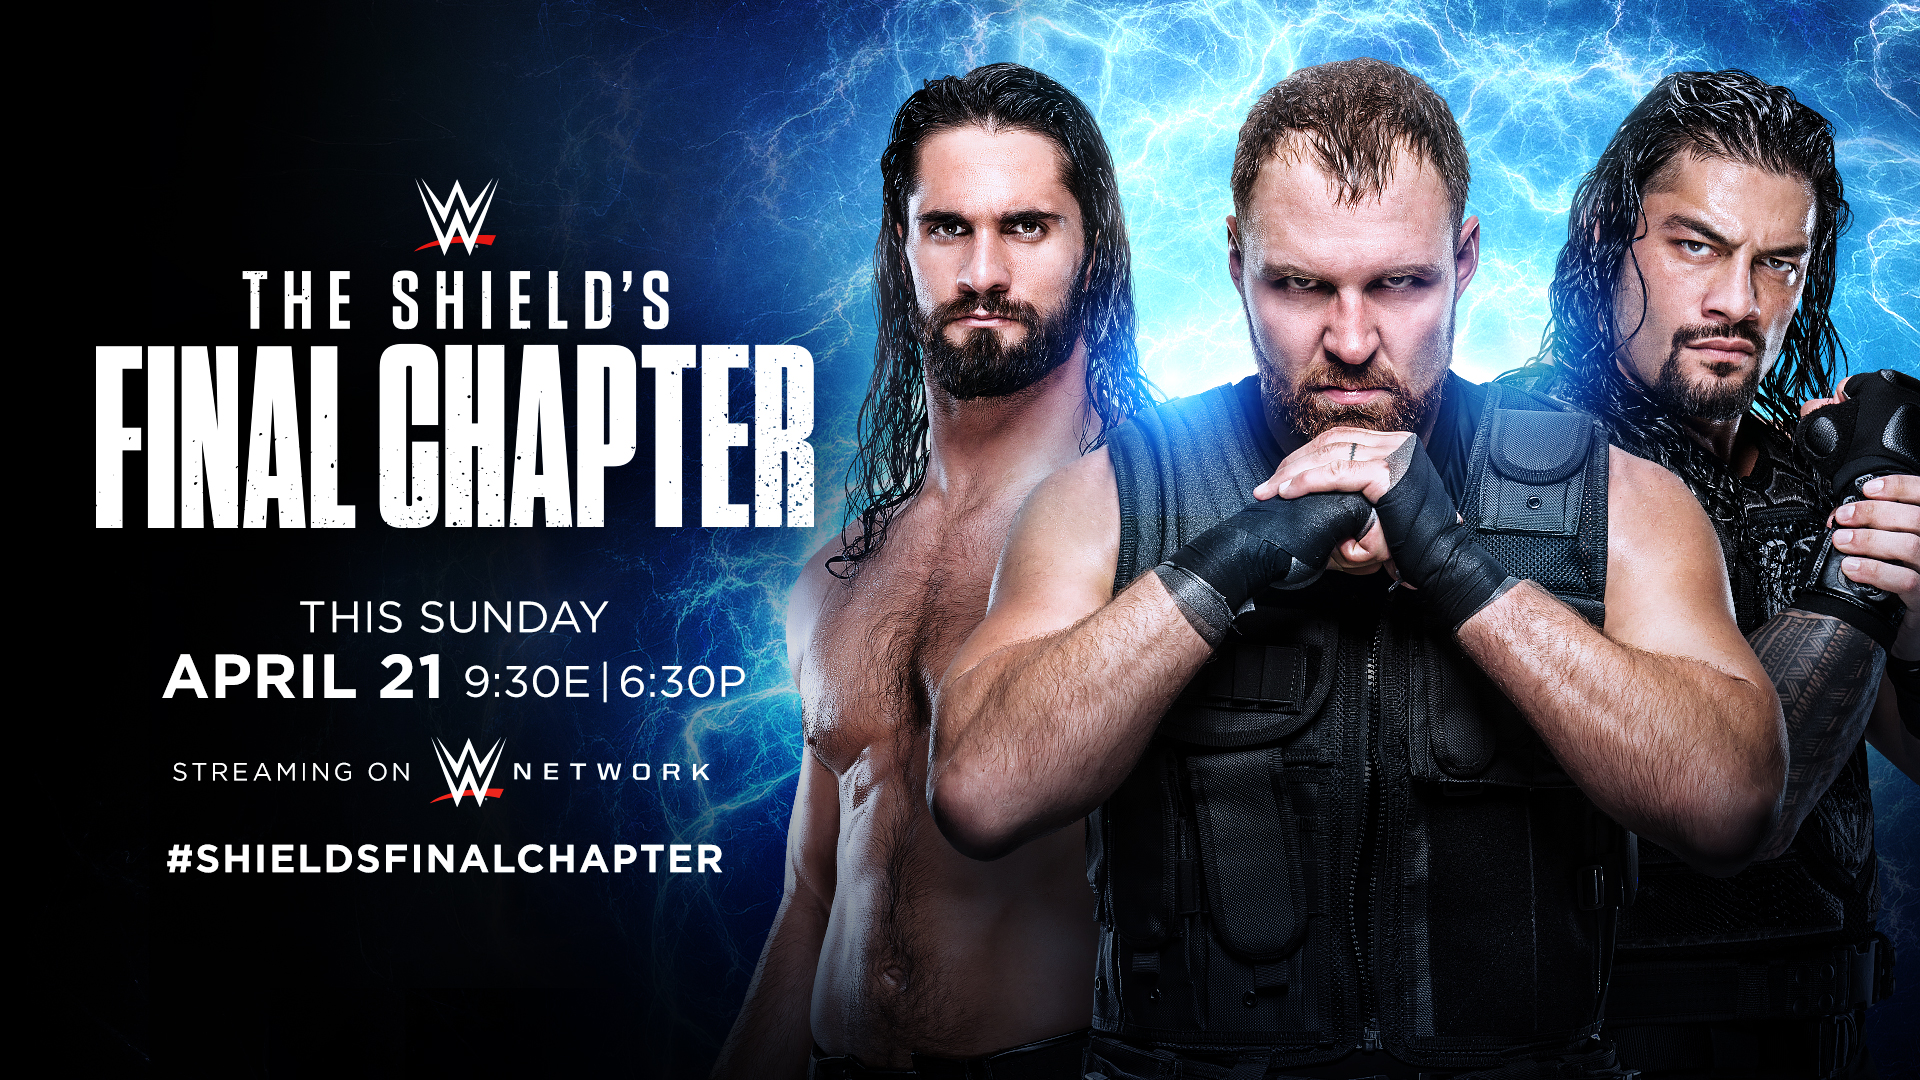 Jon Moxley Reveals His Pay for The Shield's Final Chapter Network